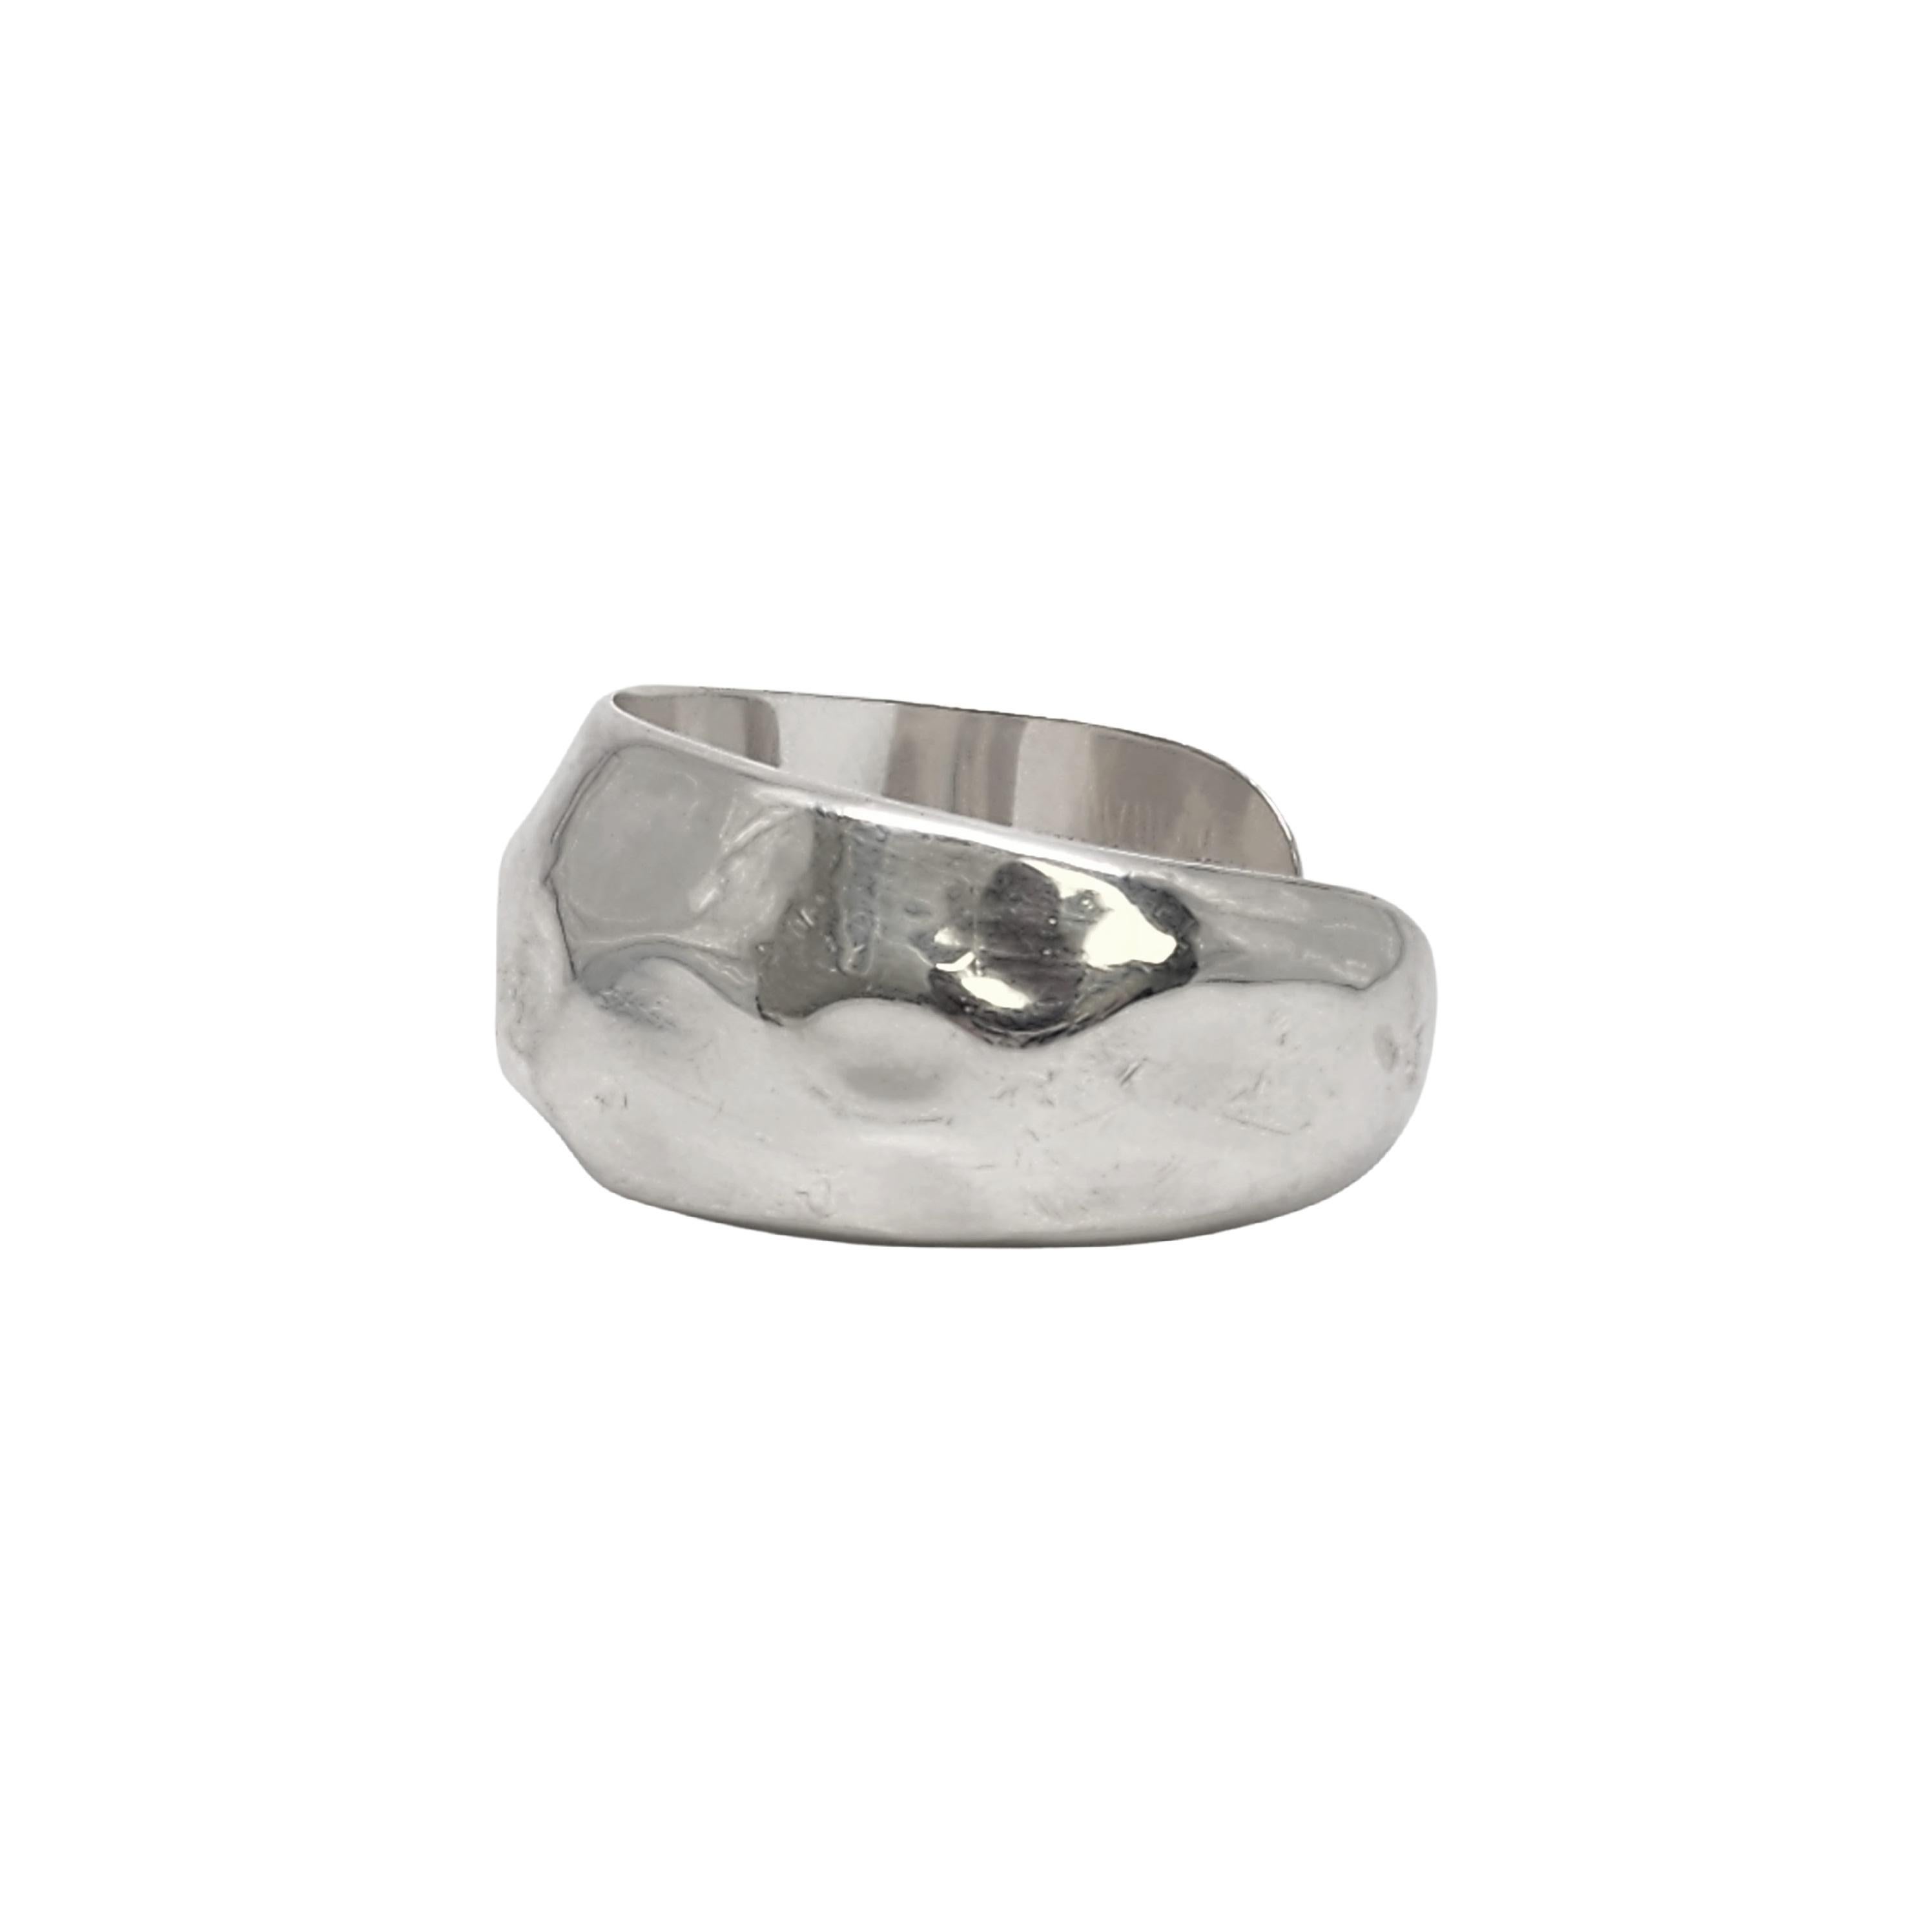 Sterling silver hammered faceted cuff bracelet by Tiffany & Co.

Engraved on the inside with what appears to be SOM 50 (see photo).

Authentic Tiffany cuff bracelet featuring a faceted and hammered design. Engraved on the inside of the bracelet.